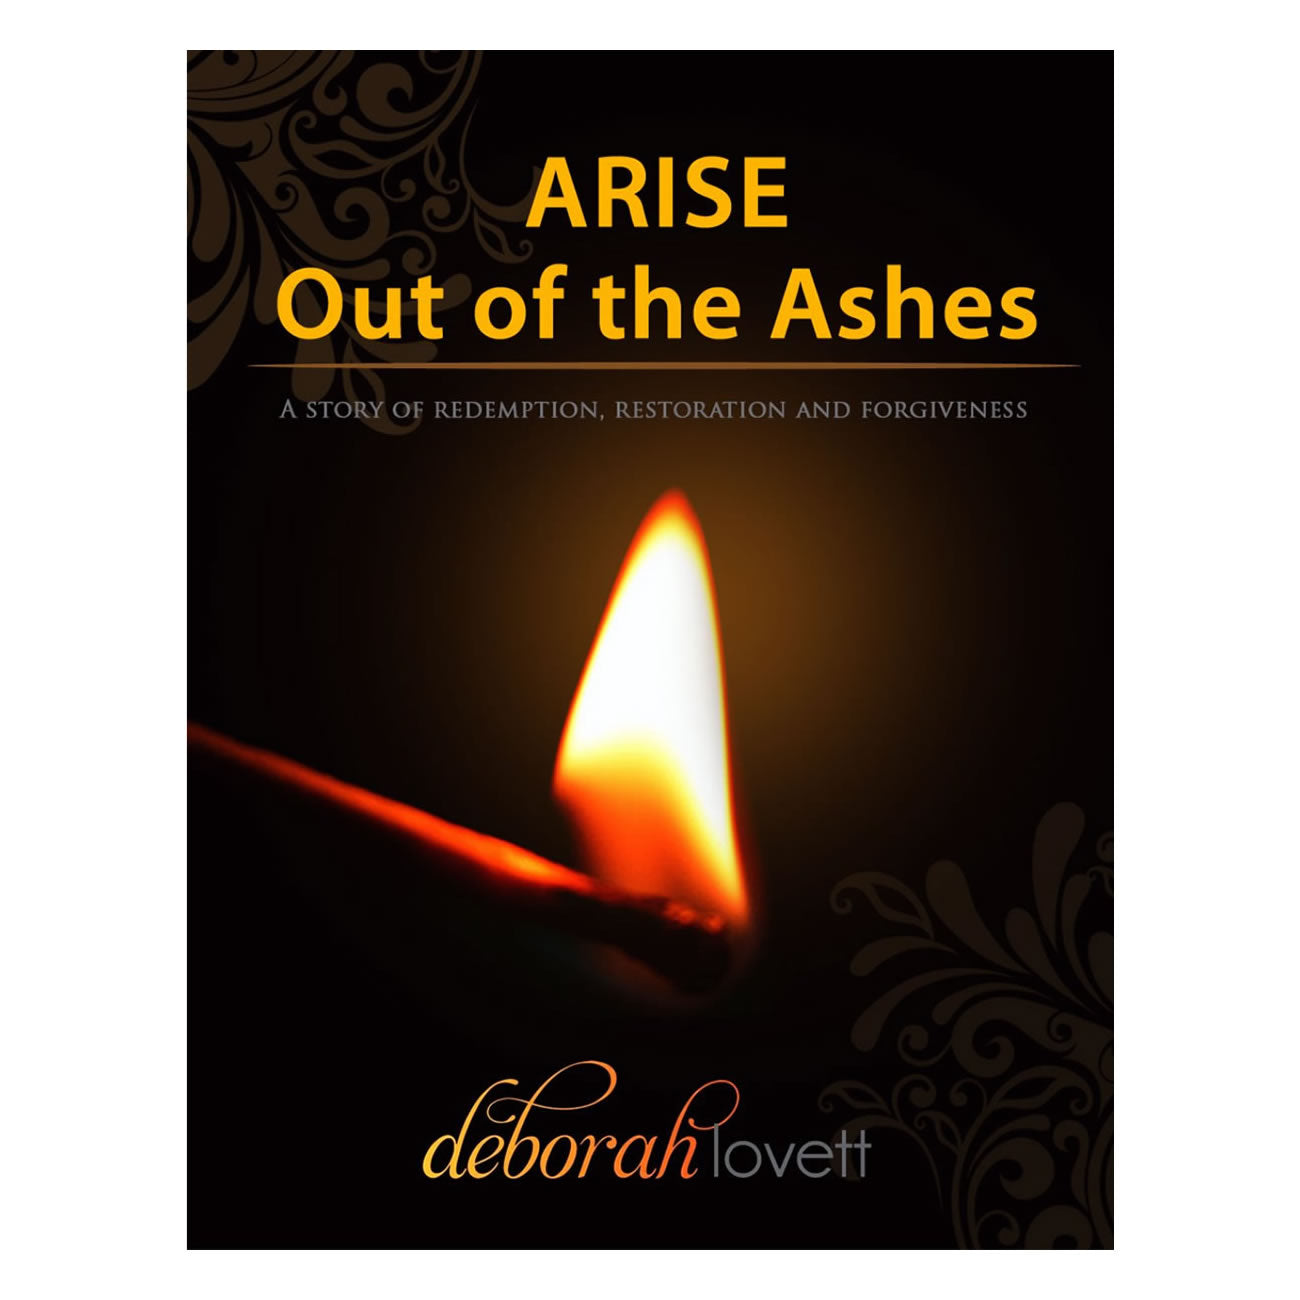 ARISE Out of the Ashes: A Story of Redemption, Restoration and Forgiveness